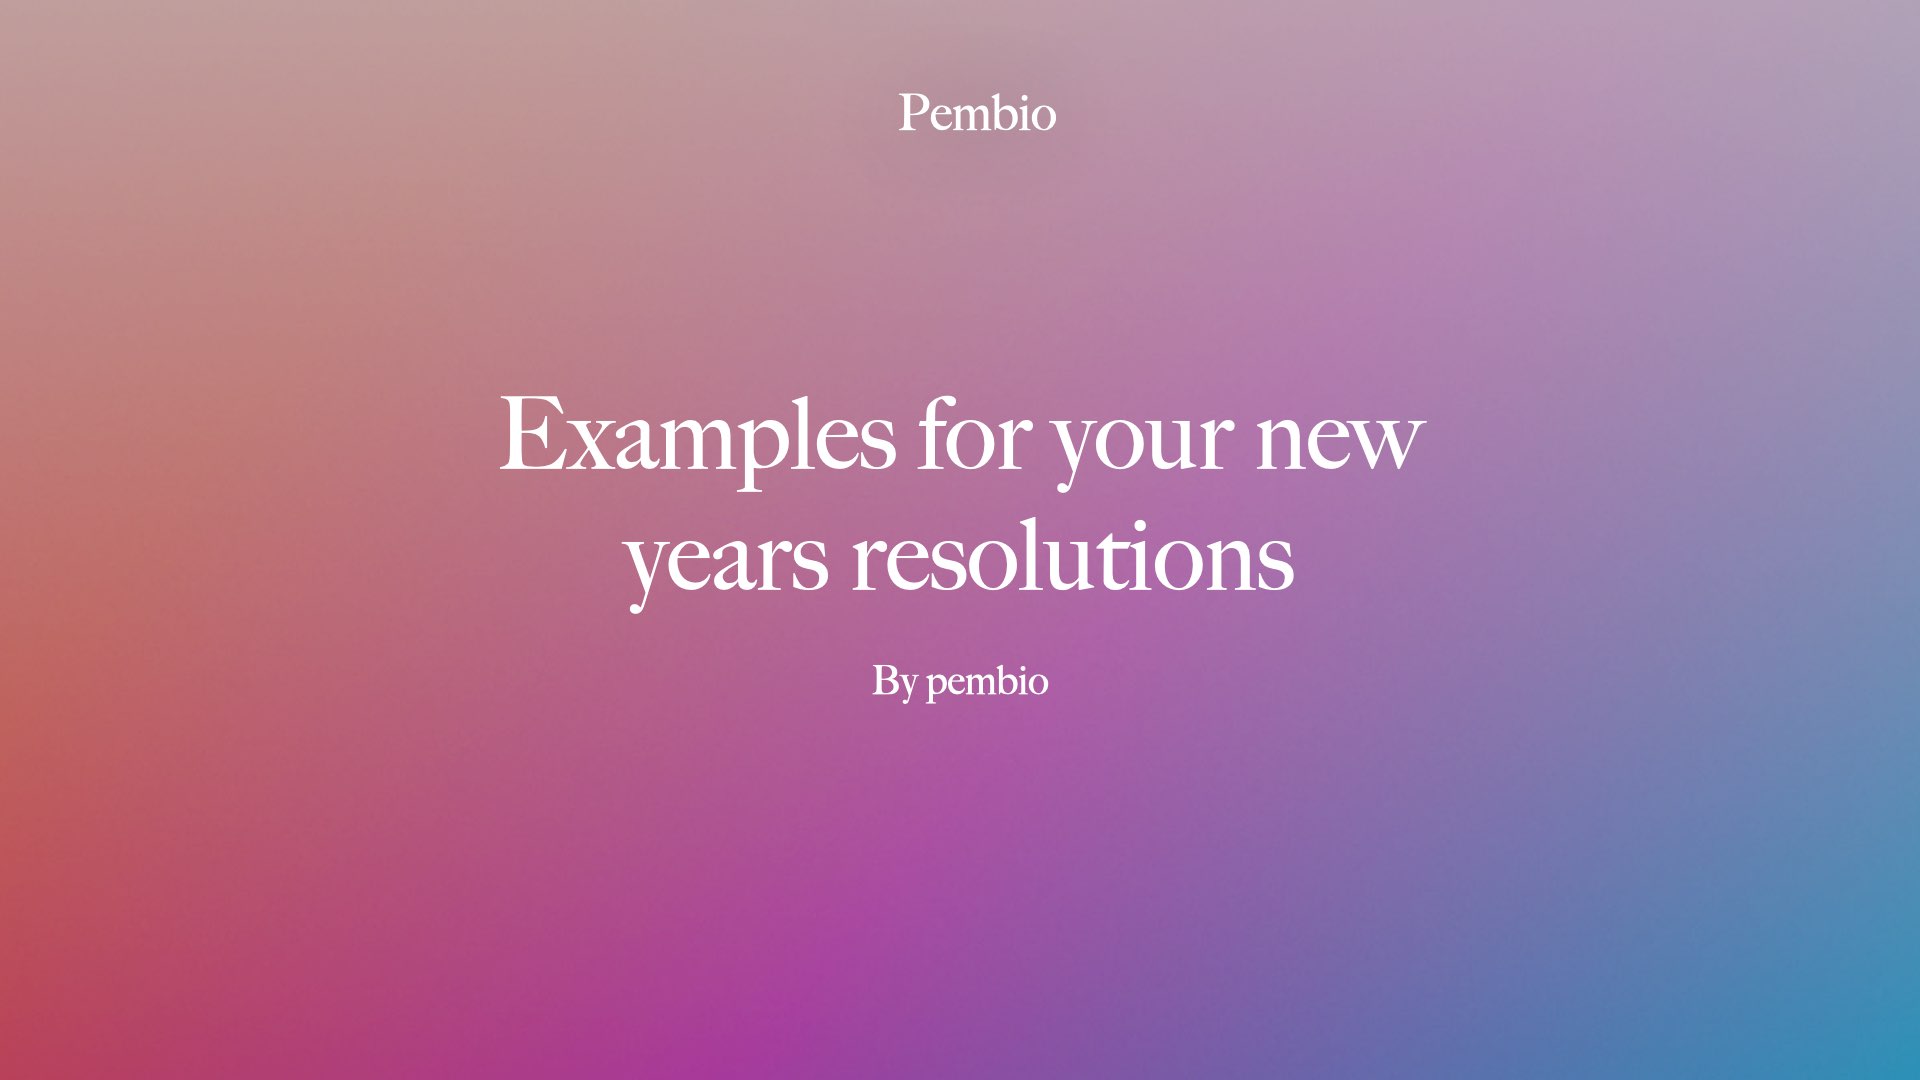 New years resolutions physical health wellness examples